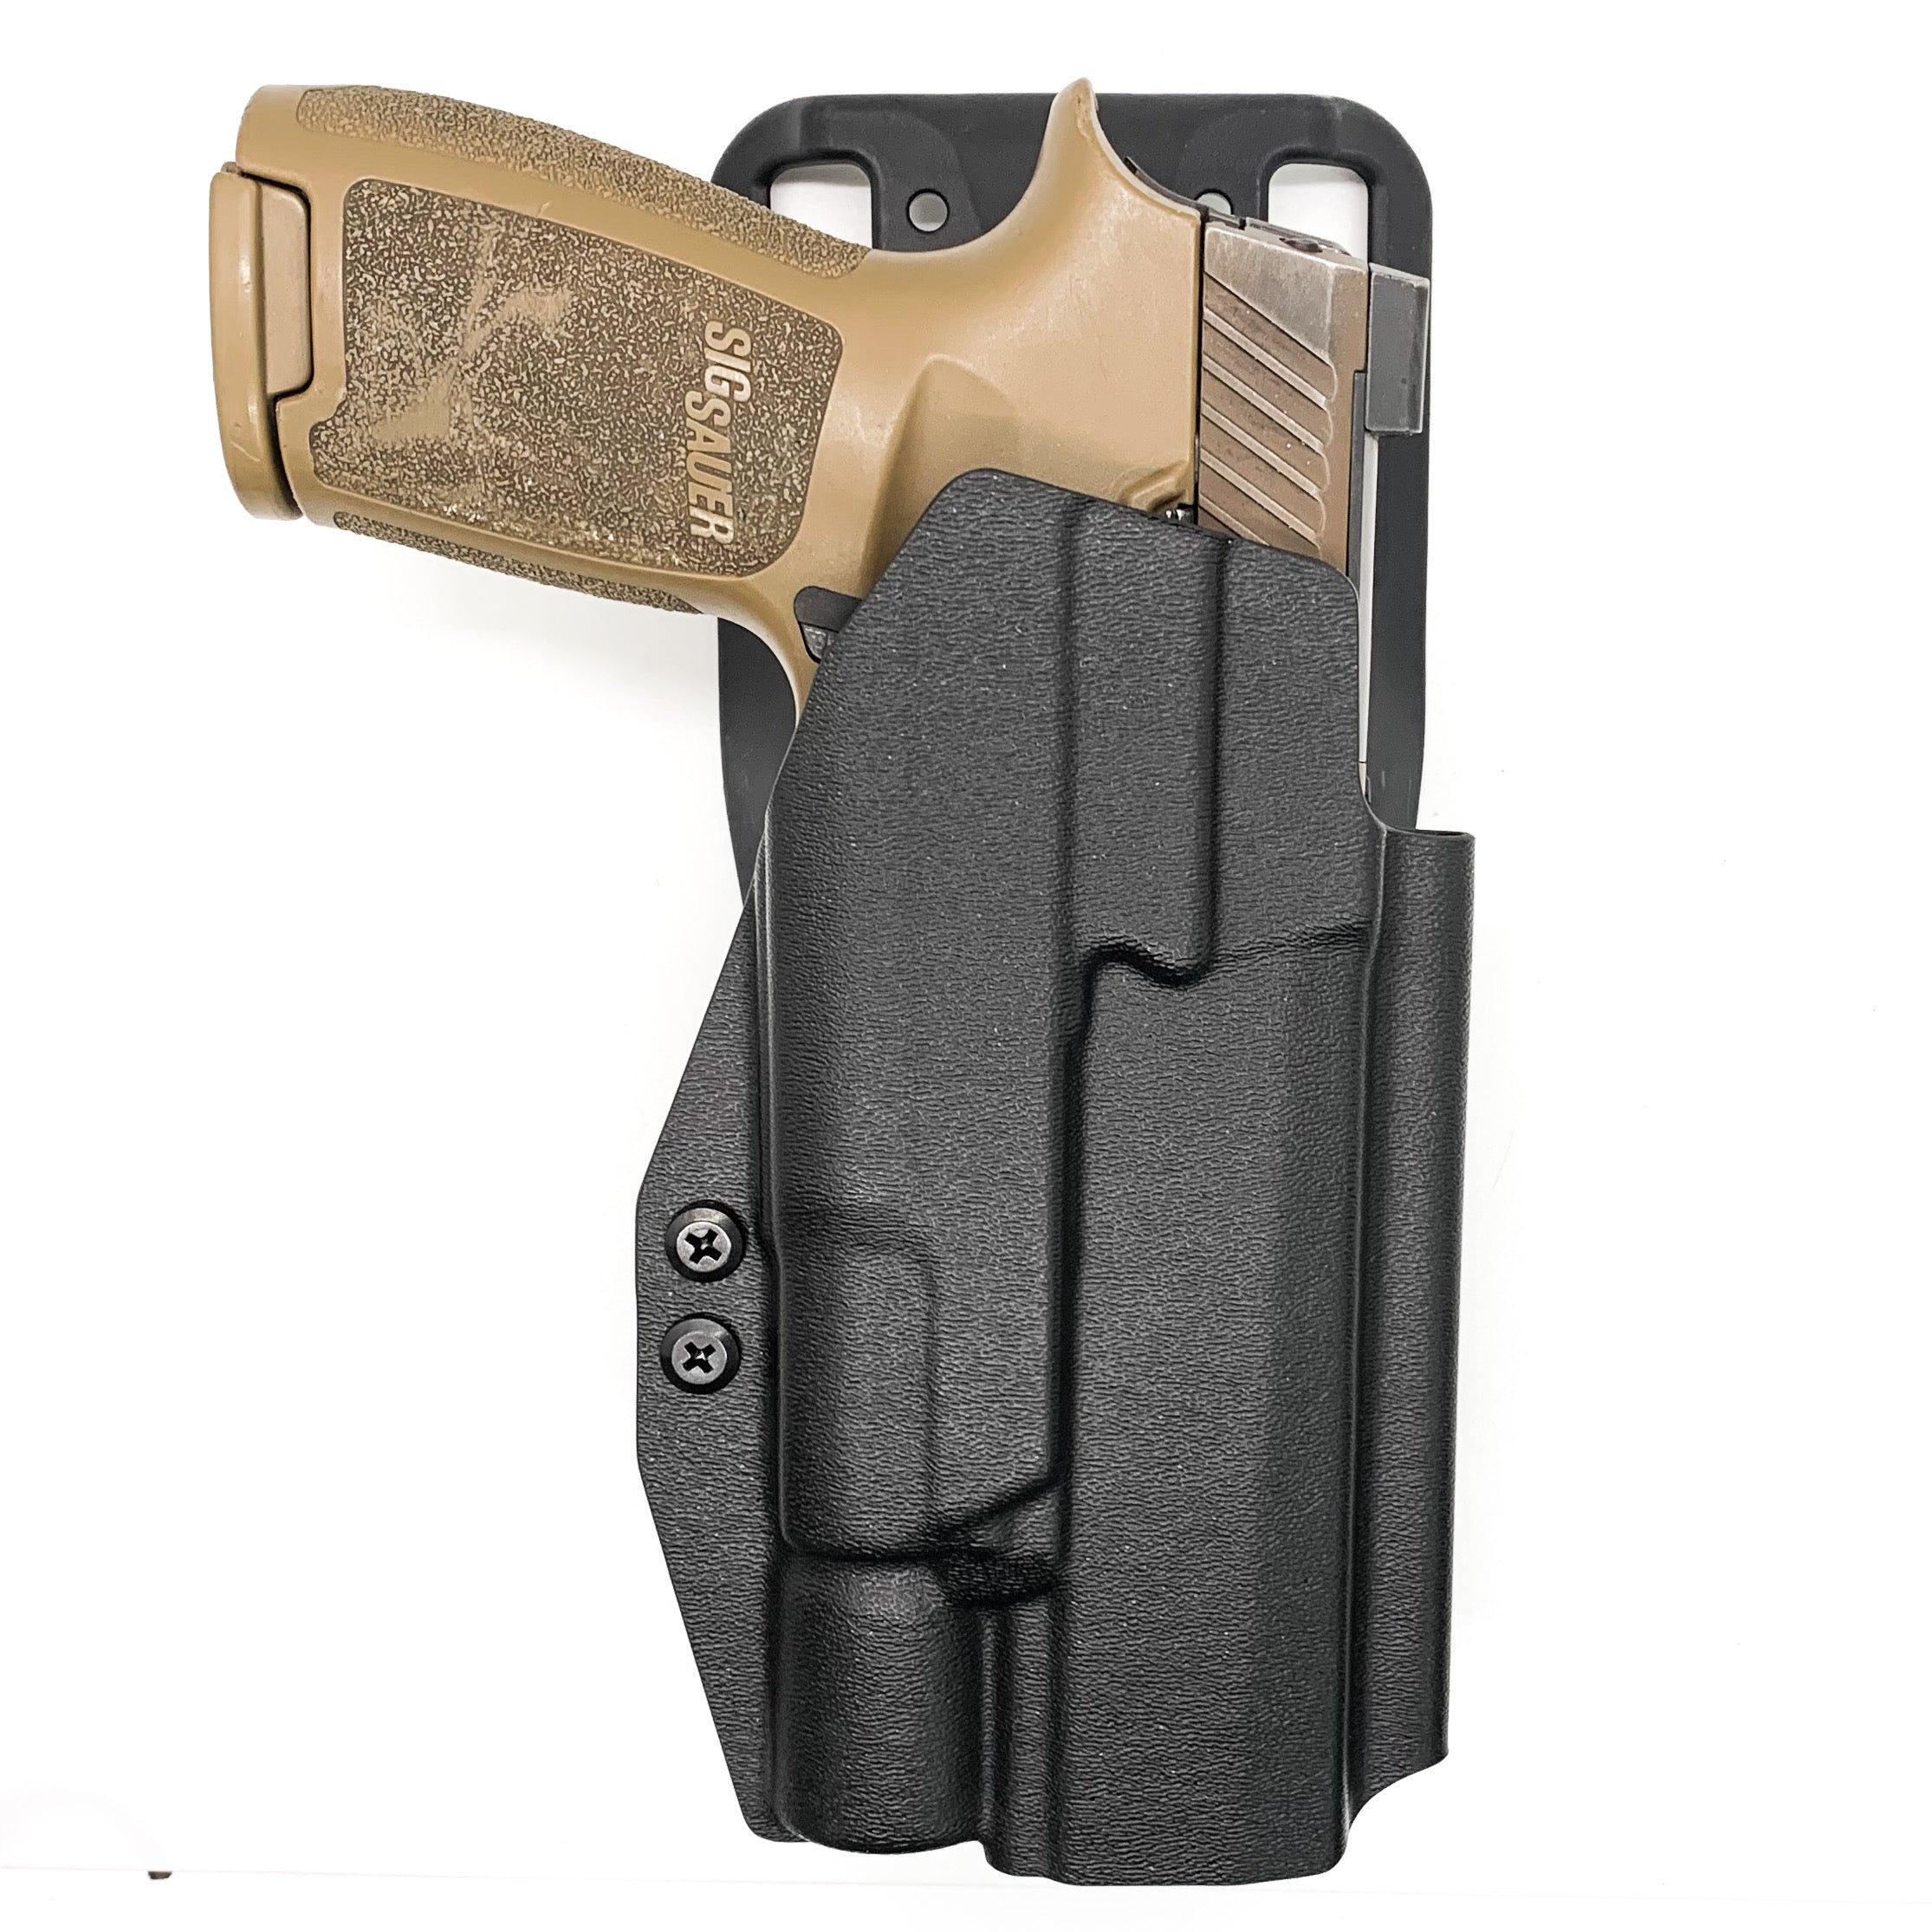 Outside Waistband Kydex Duty & Competition Holster designed to fit the Sig Sauer P320 Full Size, M18, M17, X-Five, and Carry pistols with the Surefire X300U-A or X300U-B light mounted to the pistol. Cleared for red dot sights and front suppressor height sights up to 3/8 tall.  Adjustable retention. Made in the USA